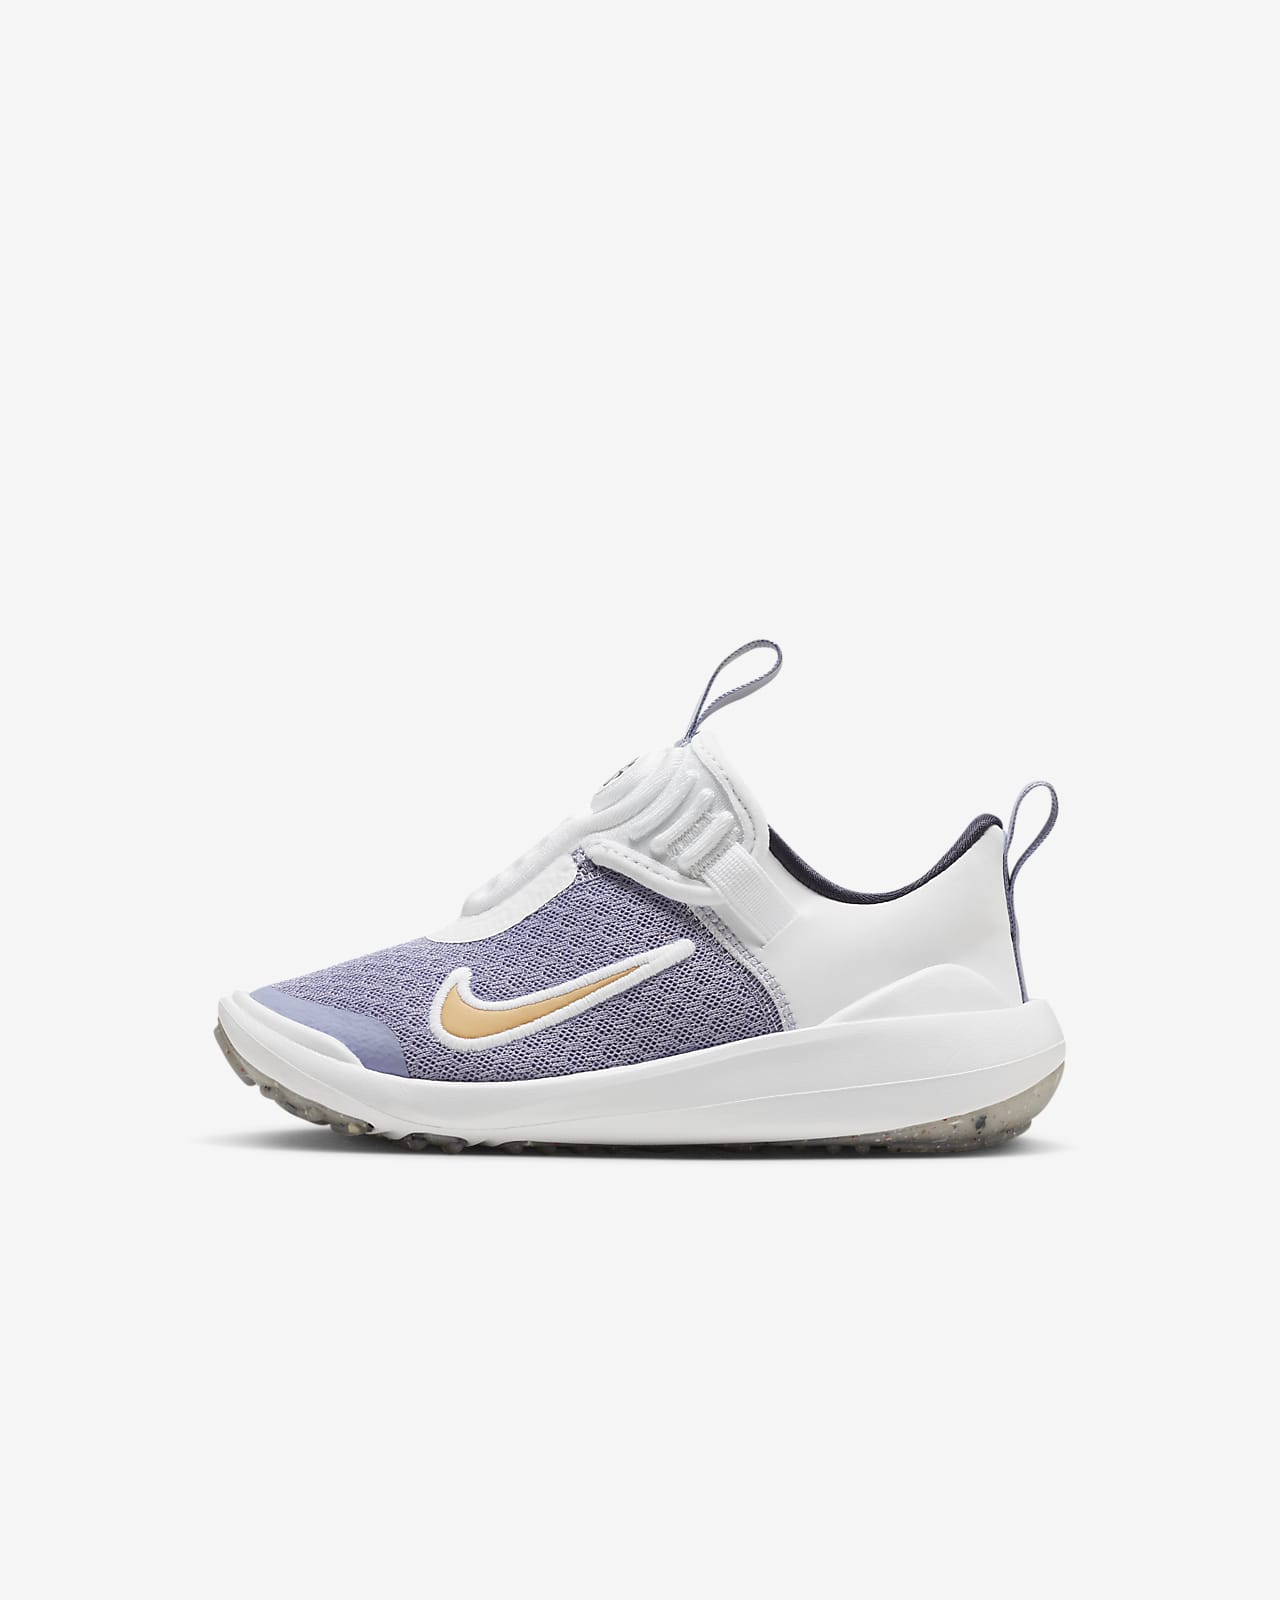 Nike E-Series 1.0 Younger Kids' Shoes